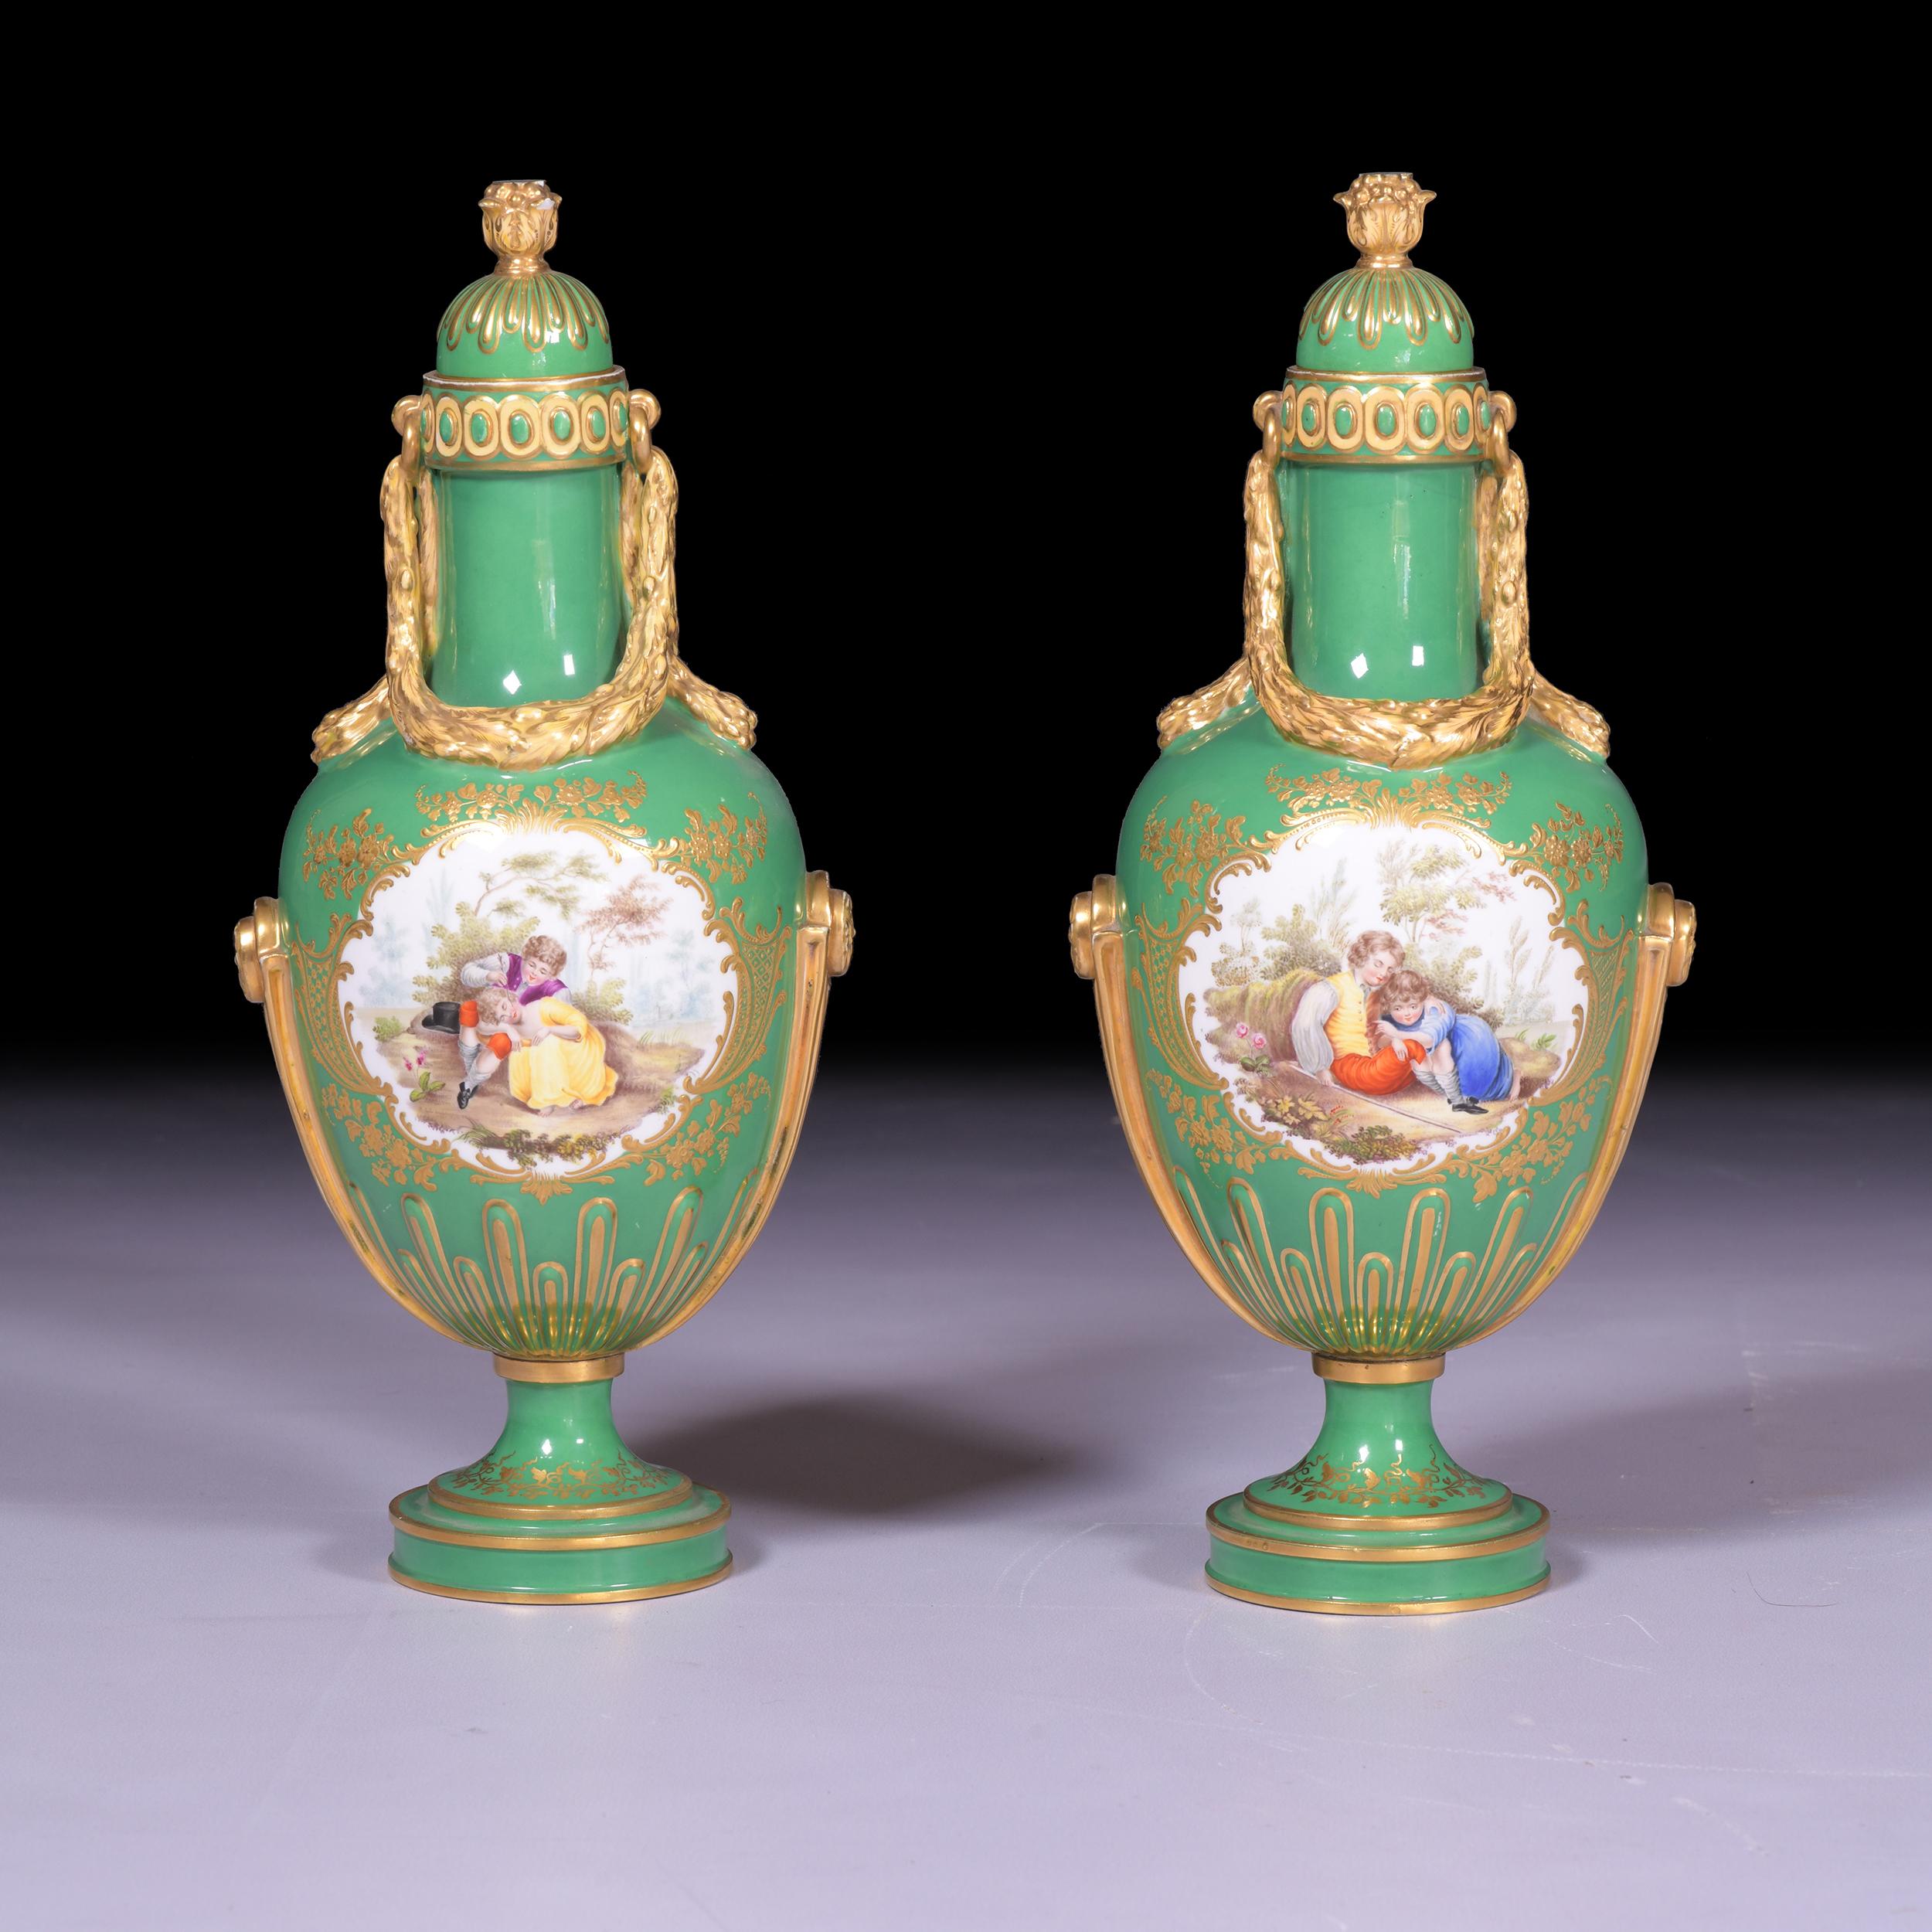 Pair Of 19th Century English Porcelain Vases & Covers By Coalport For Sale 1